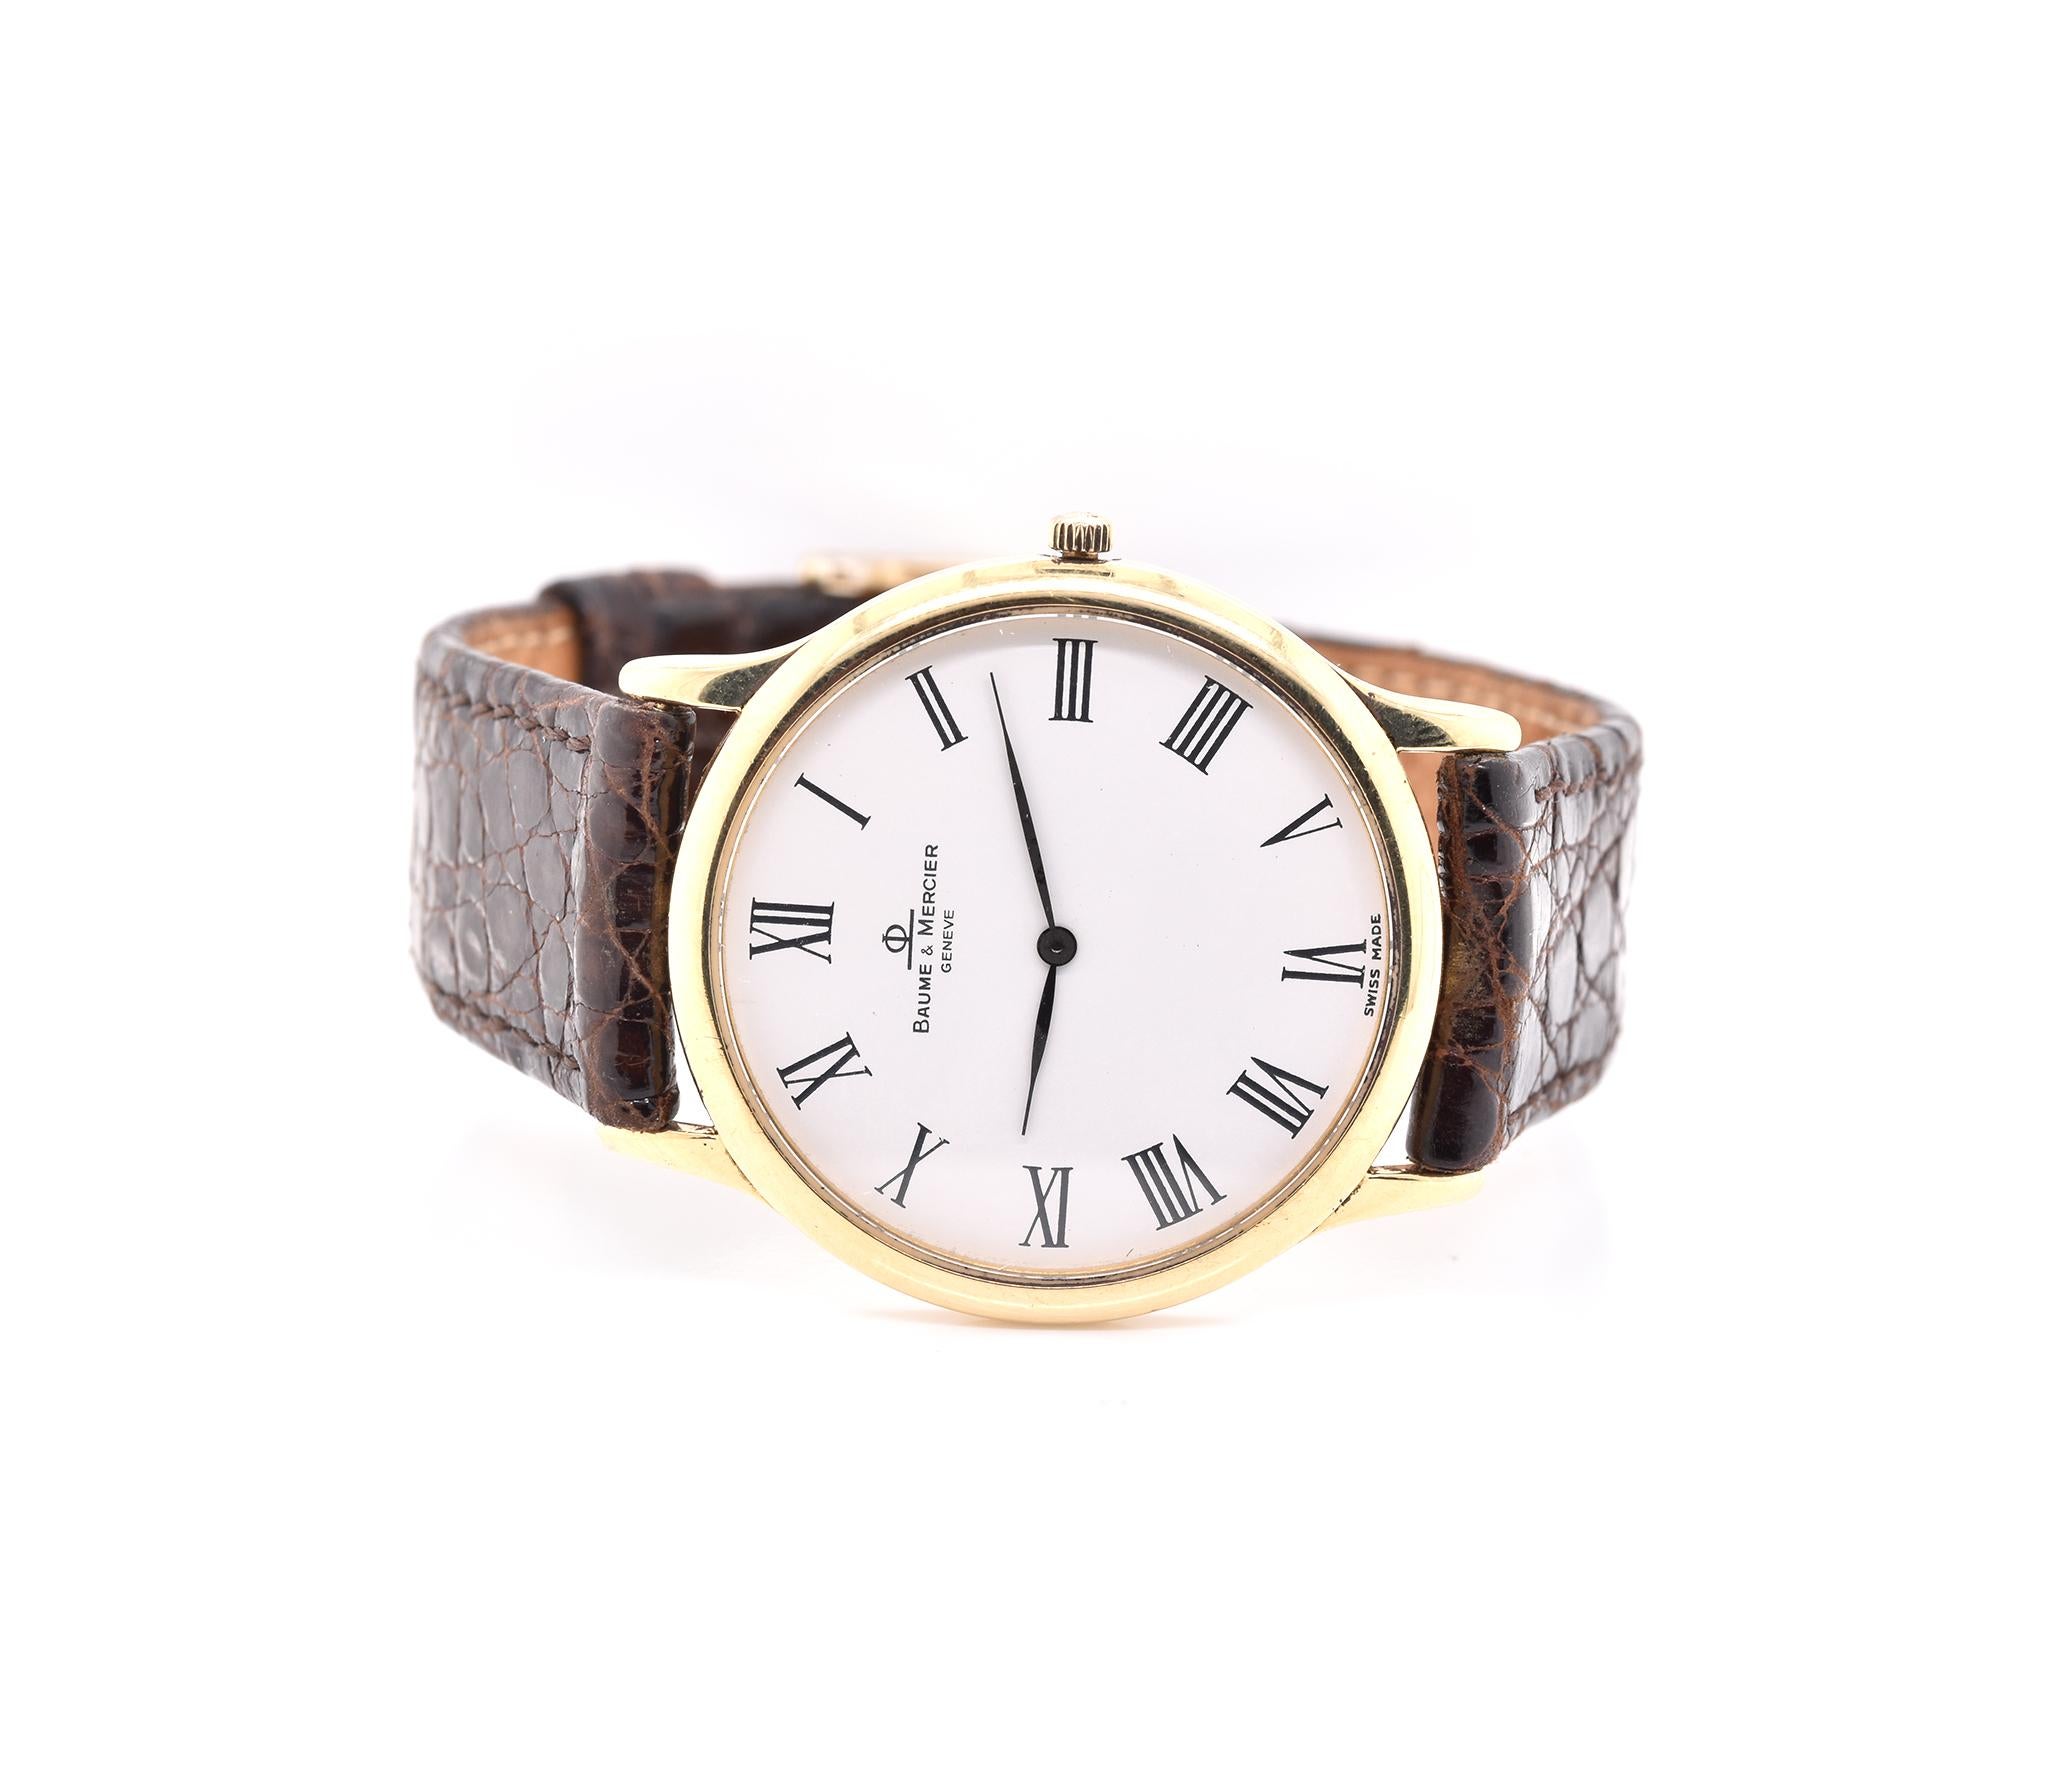 Movement: quartz
Function: hours, minutes
Case: 33.5mm 18K yellow gold round case
Band: brown leather strap with buckle
Dial: white roman dial
Serial # 2345XXX
Reference # MV045079


No box or papers
Guaranteed to be authentic by seller.
